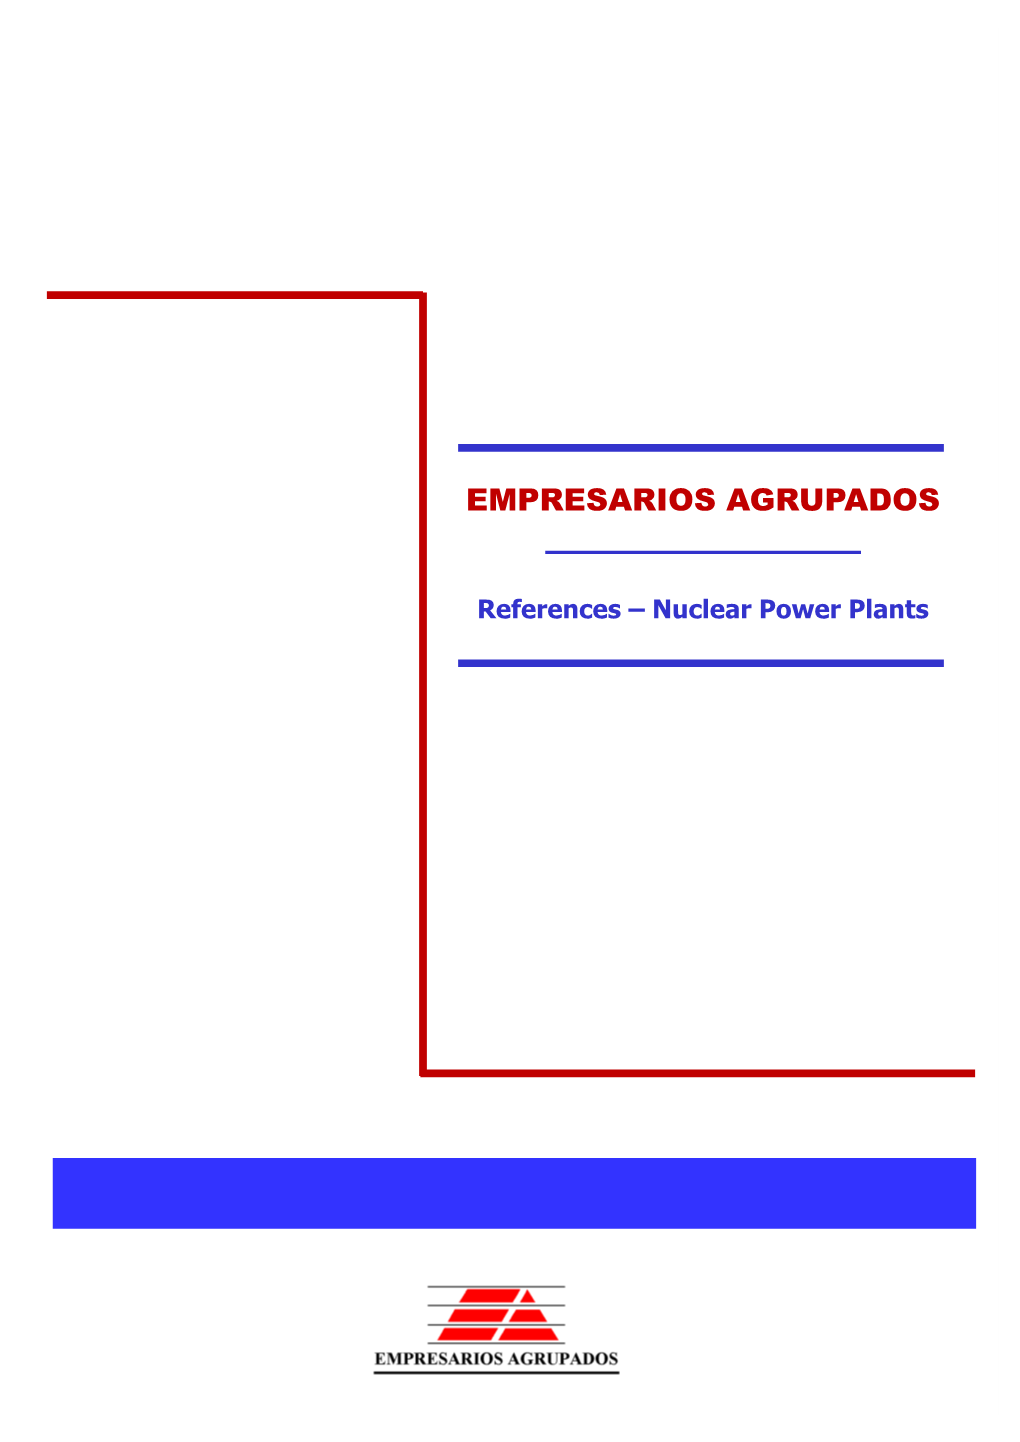 References – Nuclear Power Plants Company Profile and References for Architect-Engineering Services - Nuclear Projects